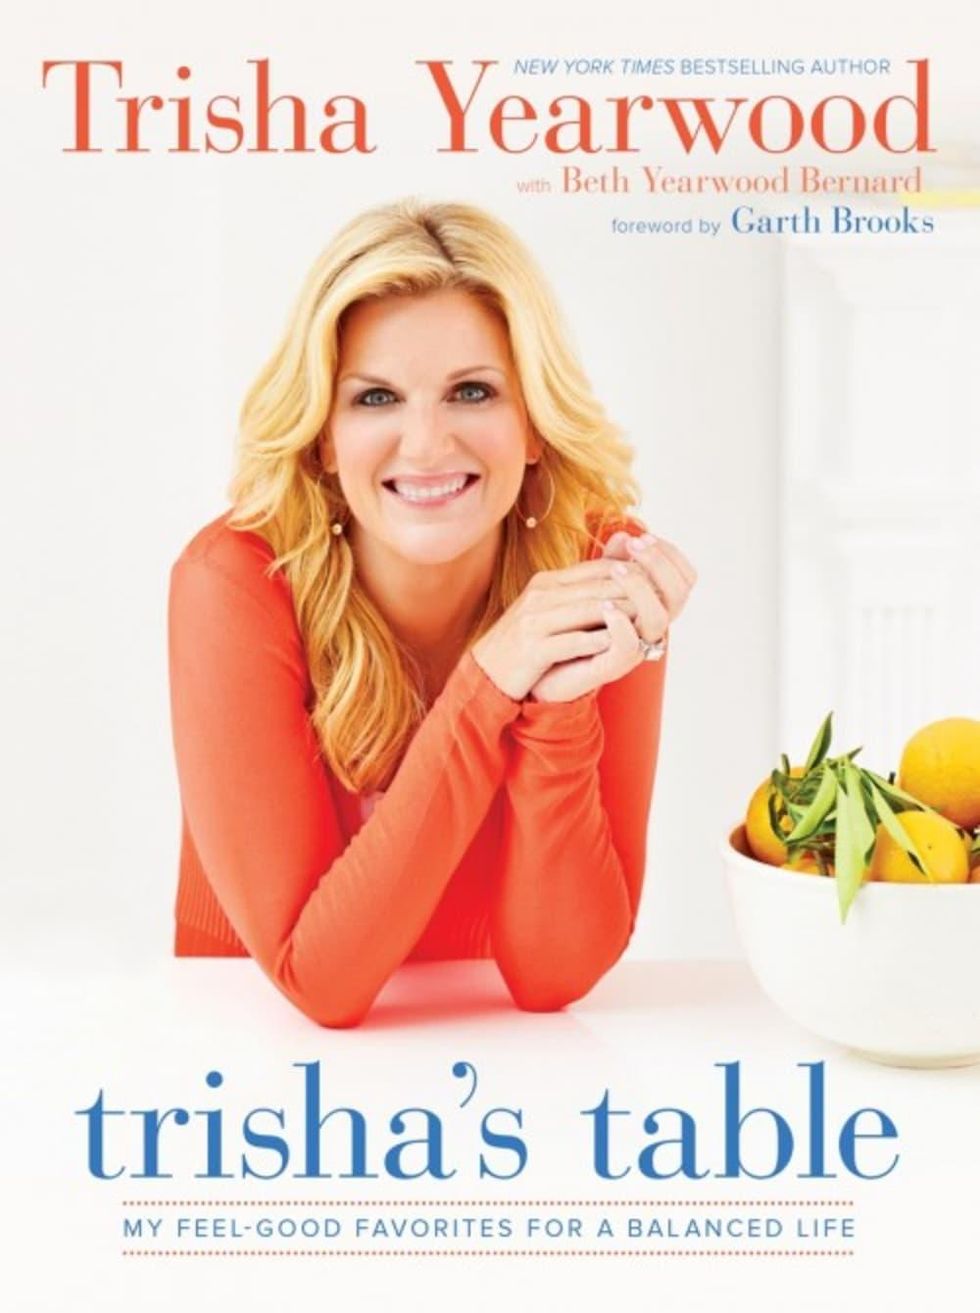 Trisha Yearwood Discusses Garths' Pasta Salad, Cookware, and the Bling in  Her Ring